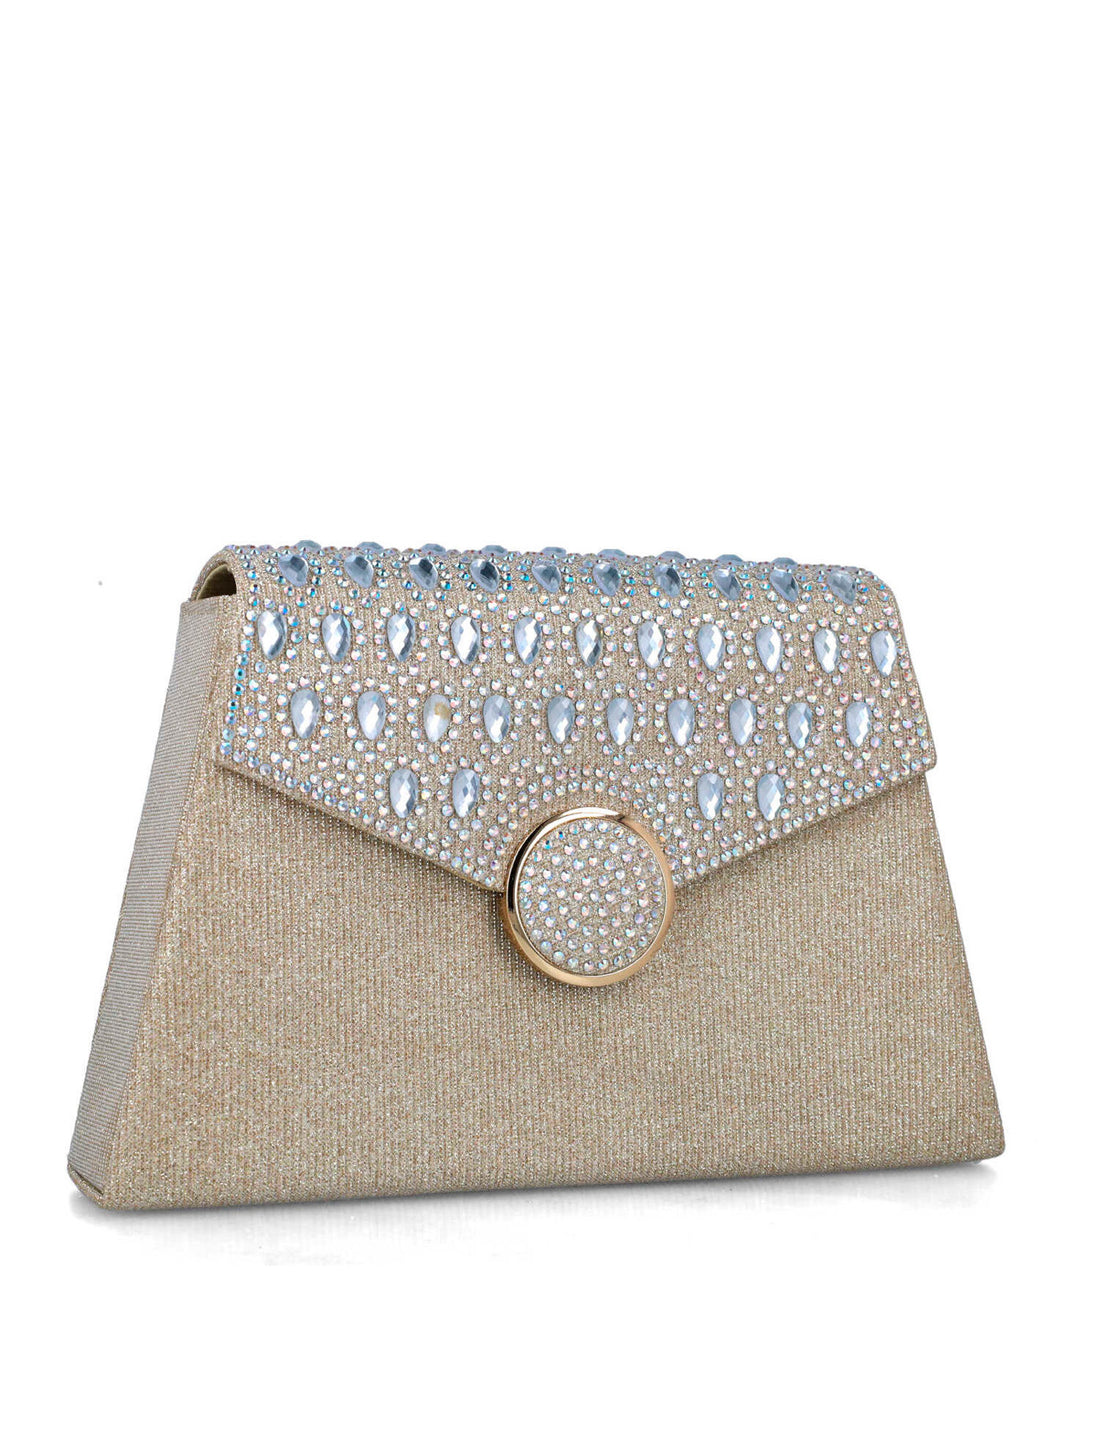 Beige Clutch With Embellished Flap_85636_00_02